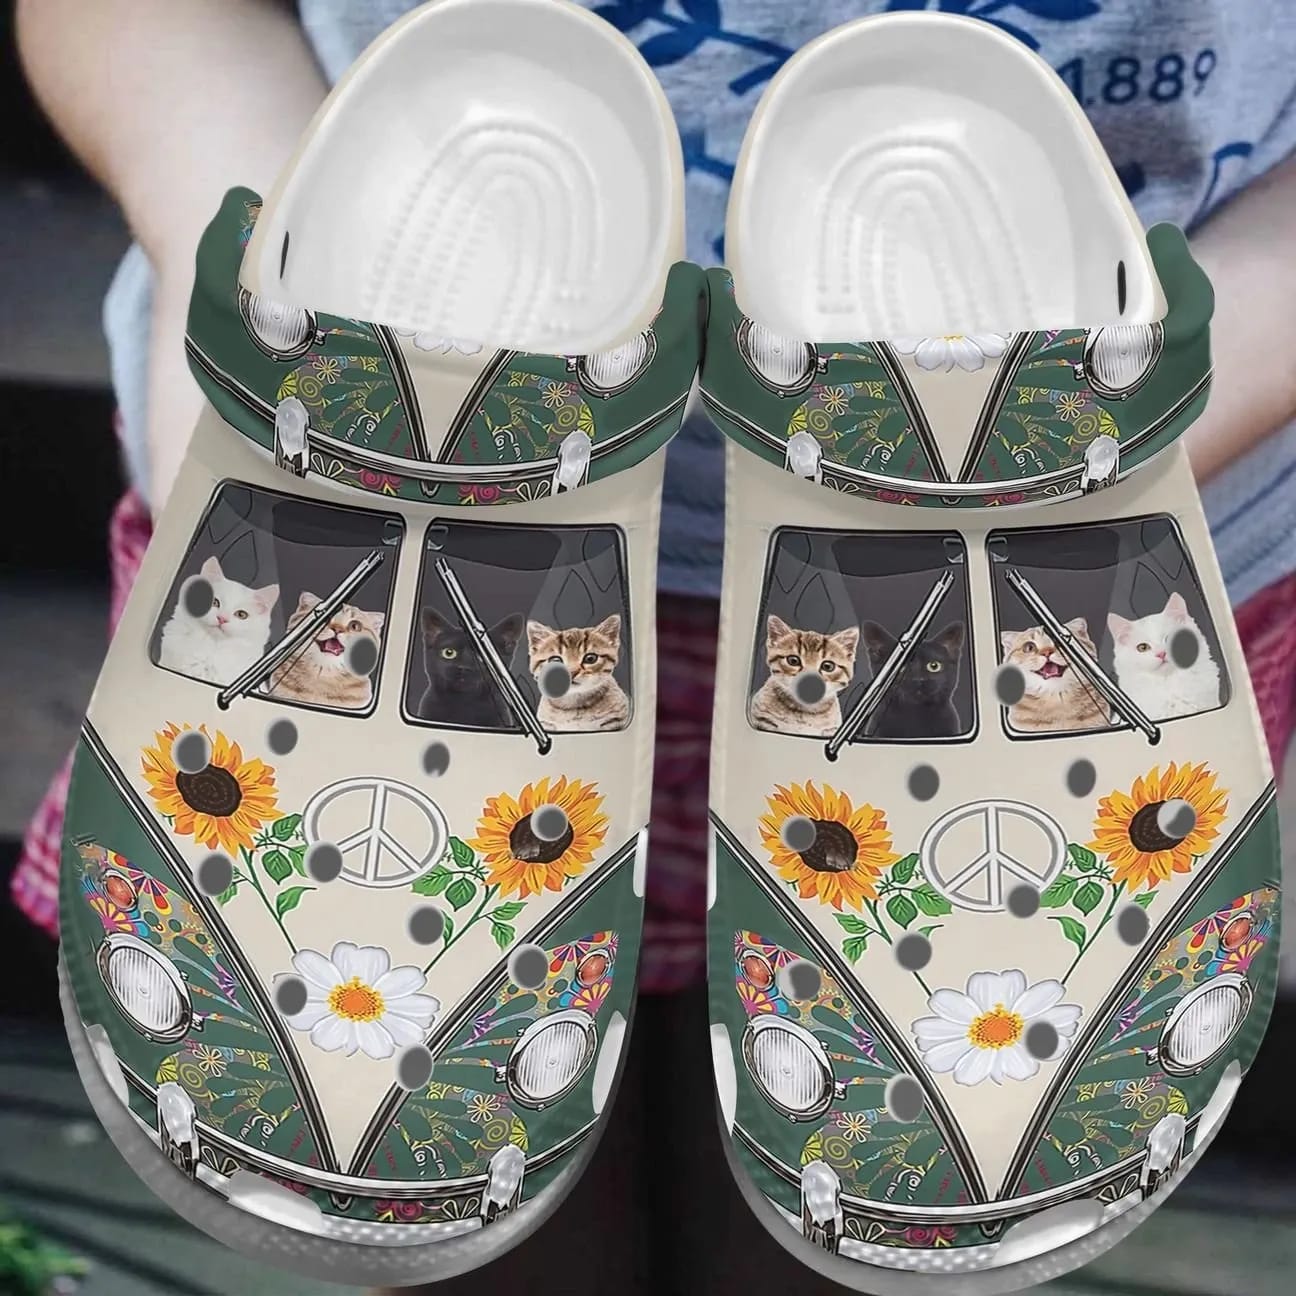 Cat Clog Crocs Fashionstyle Comfortable For Women Men Hippie Bus And Cats Wofbdx